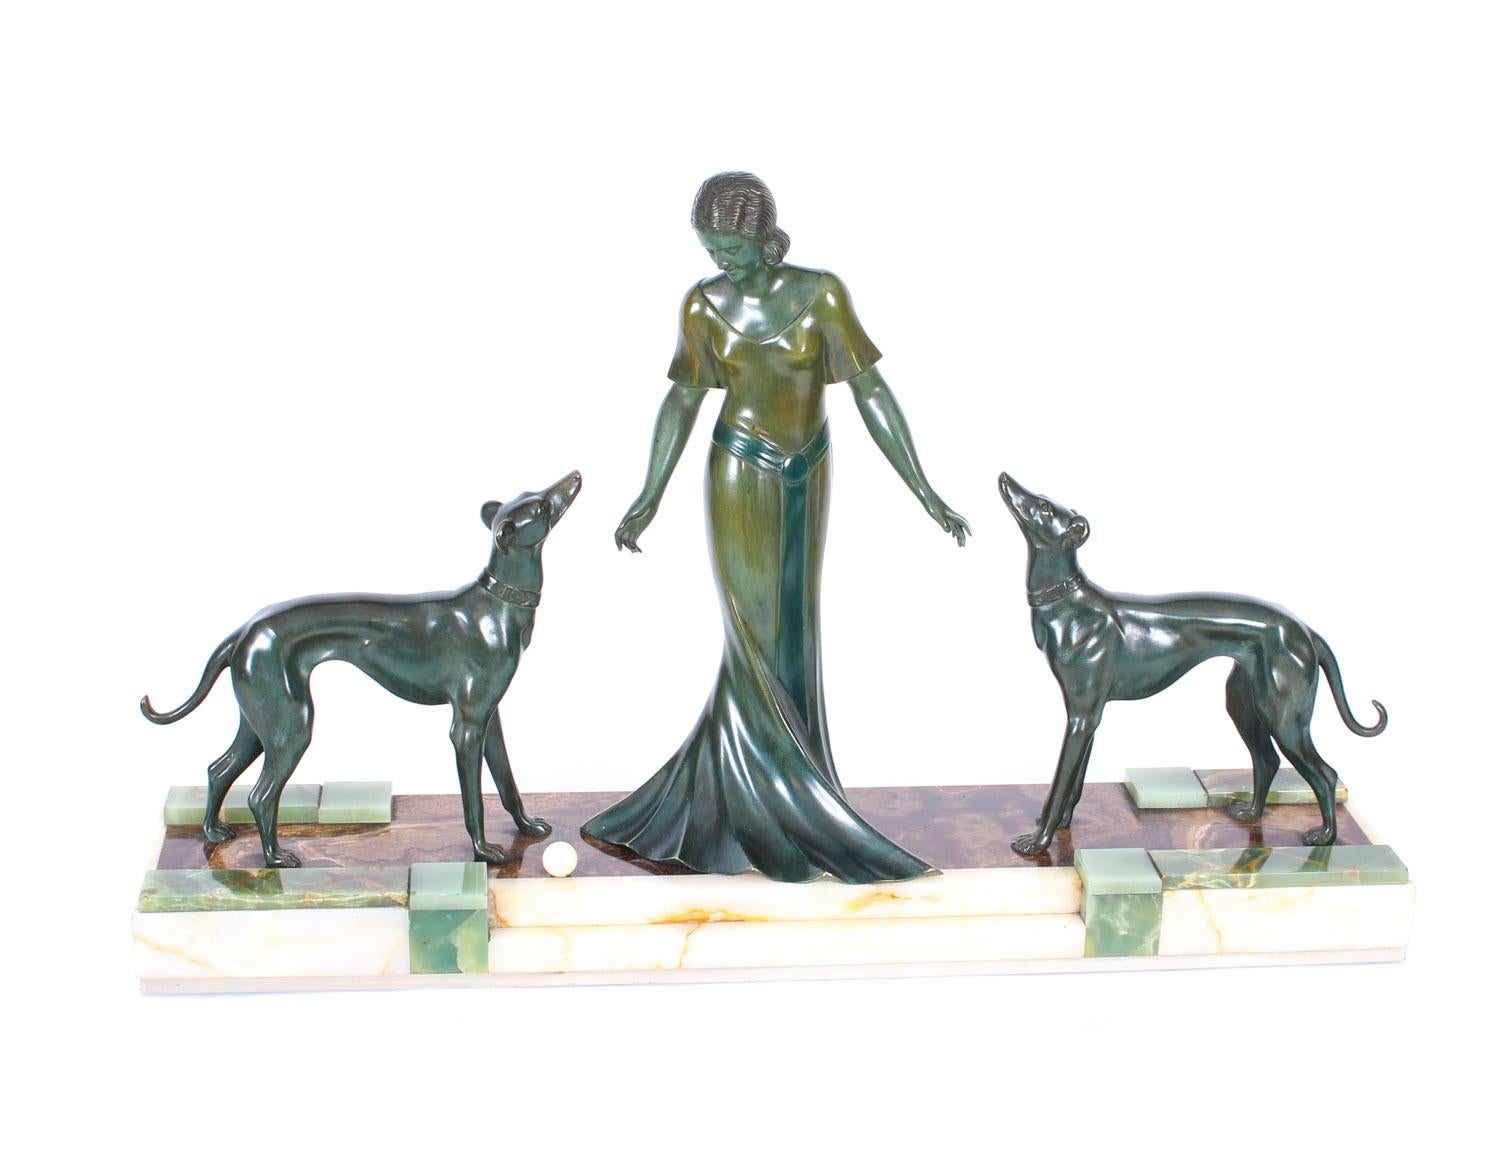 This is a magnificent large antique French Art Deco bronze sculpture of a maiden and two hounds, by the sculptor P. Huguenot, bearing his signature and circa 1920 in date.
 
This stunning sculpture features the remarkable central figure of a maiden